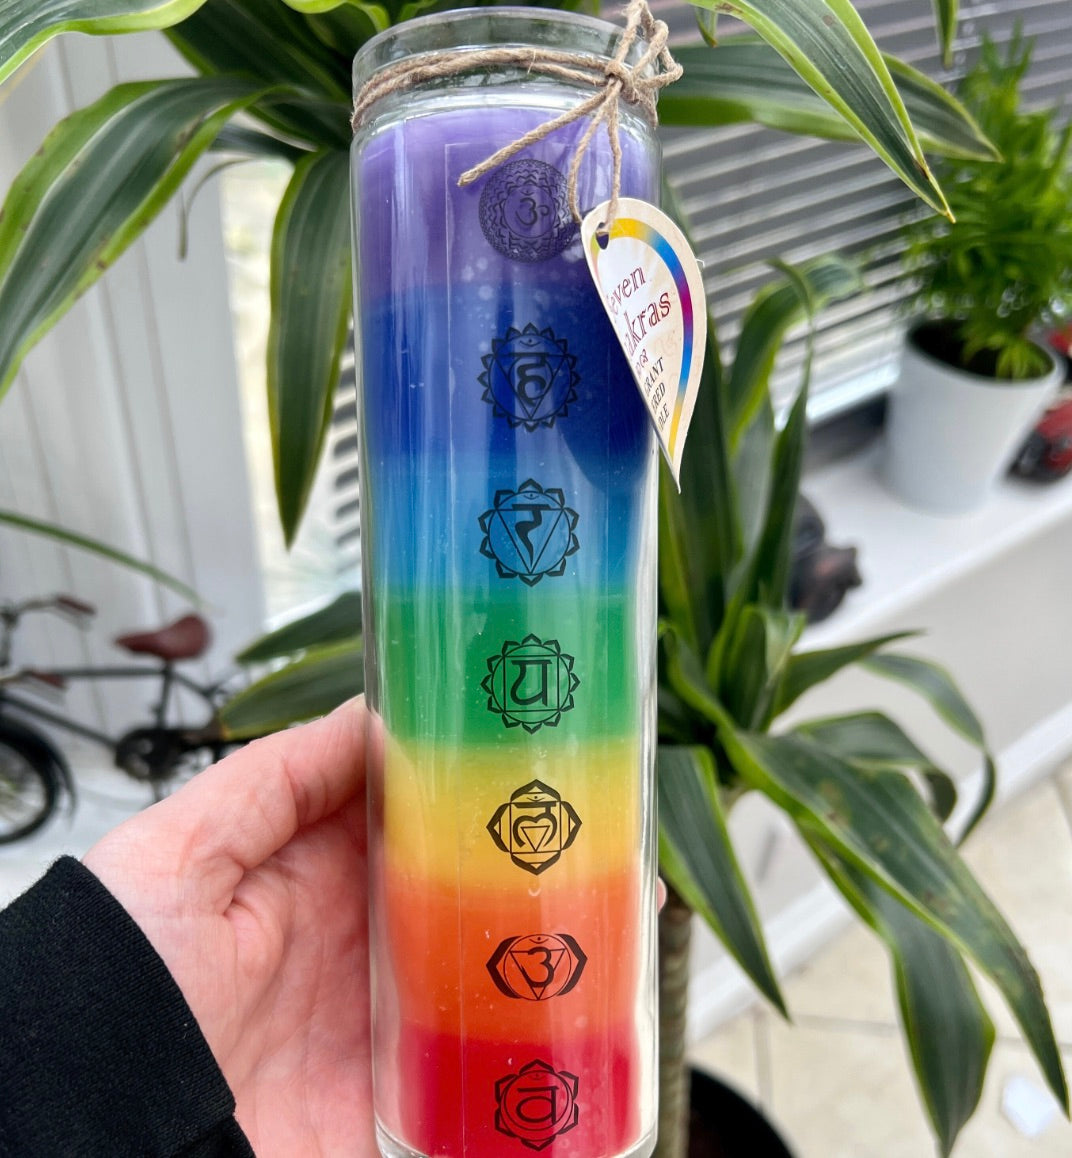 Chakra Spell Tube Candle